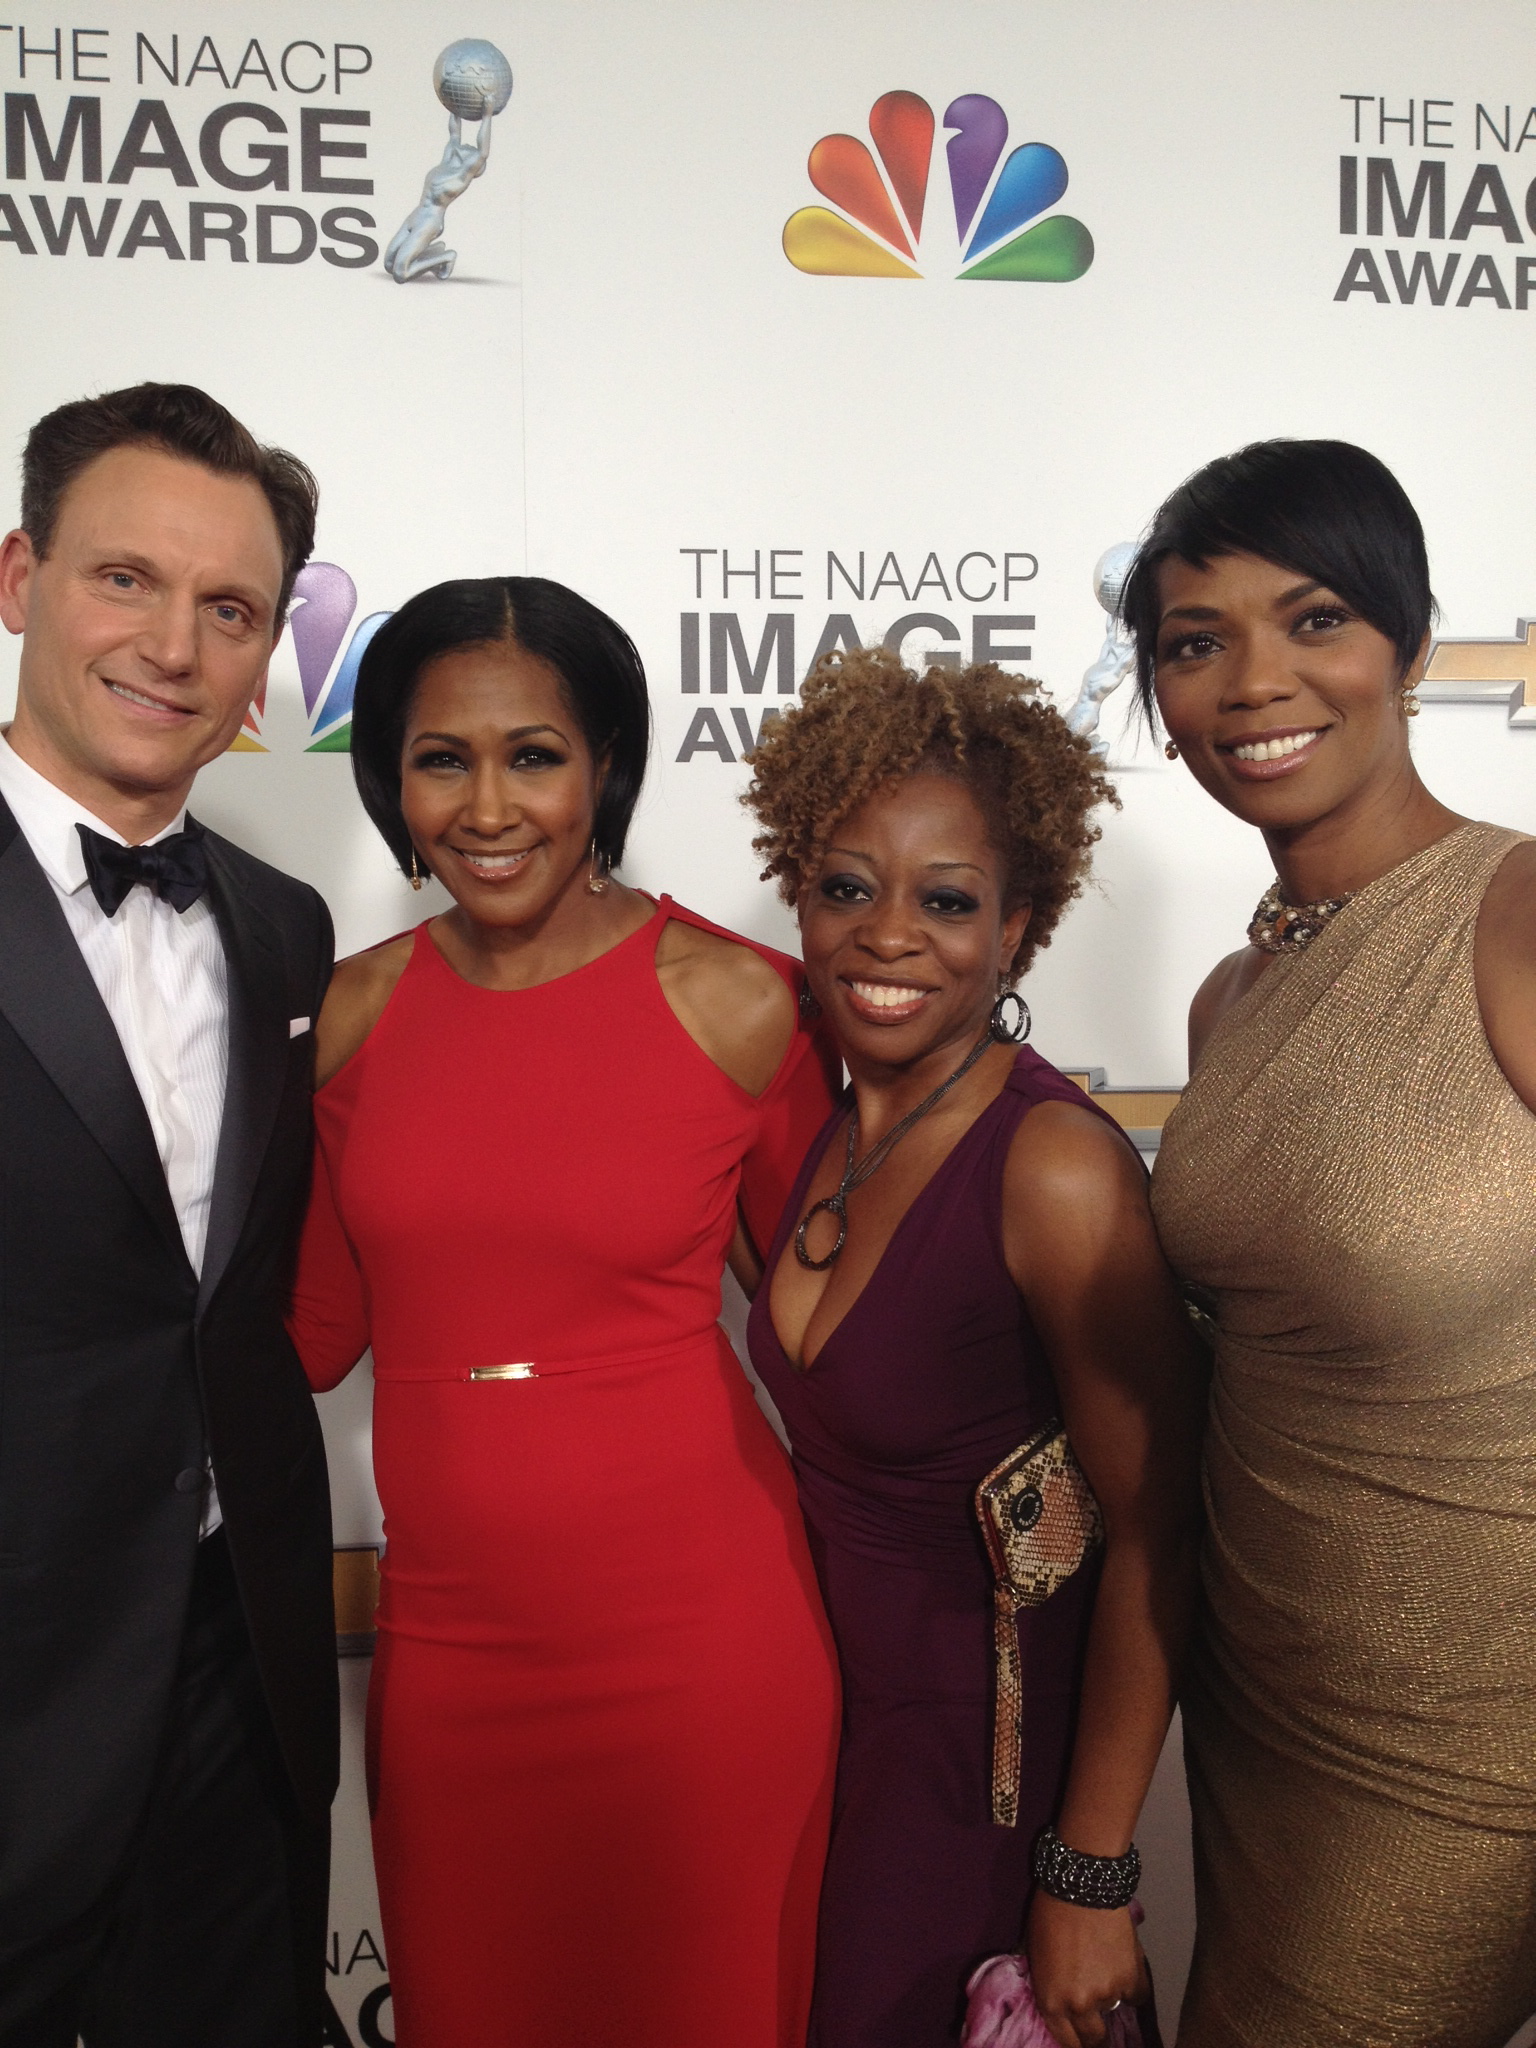 Cas Sigers, Terri J. Vaughn, Vanessa Williams and Tony Goldwyn red carpet at the NAACP Image Awards